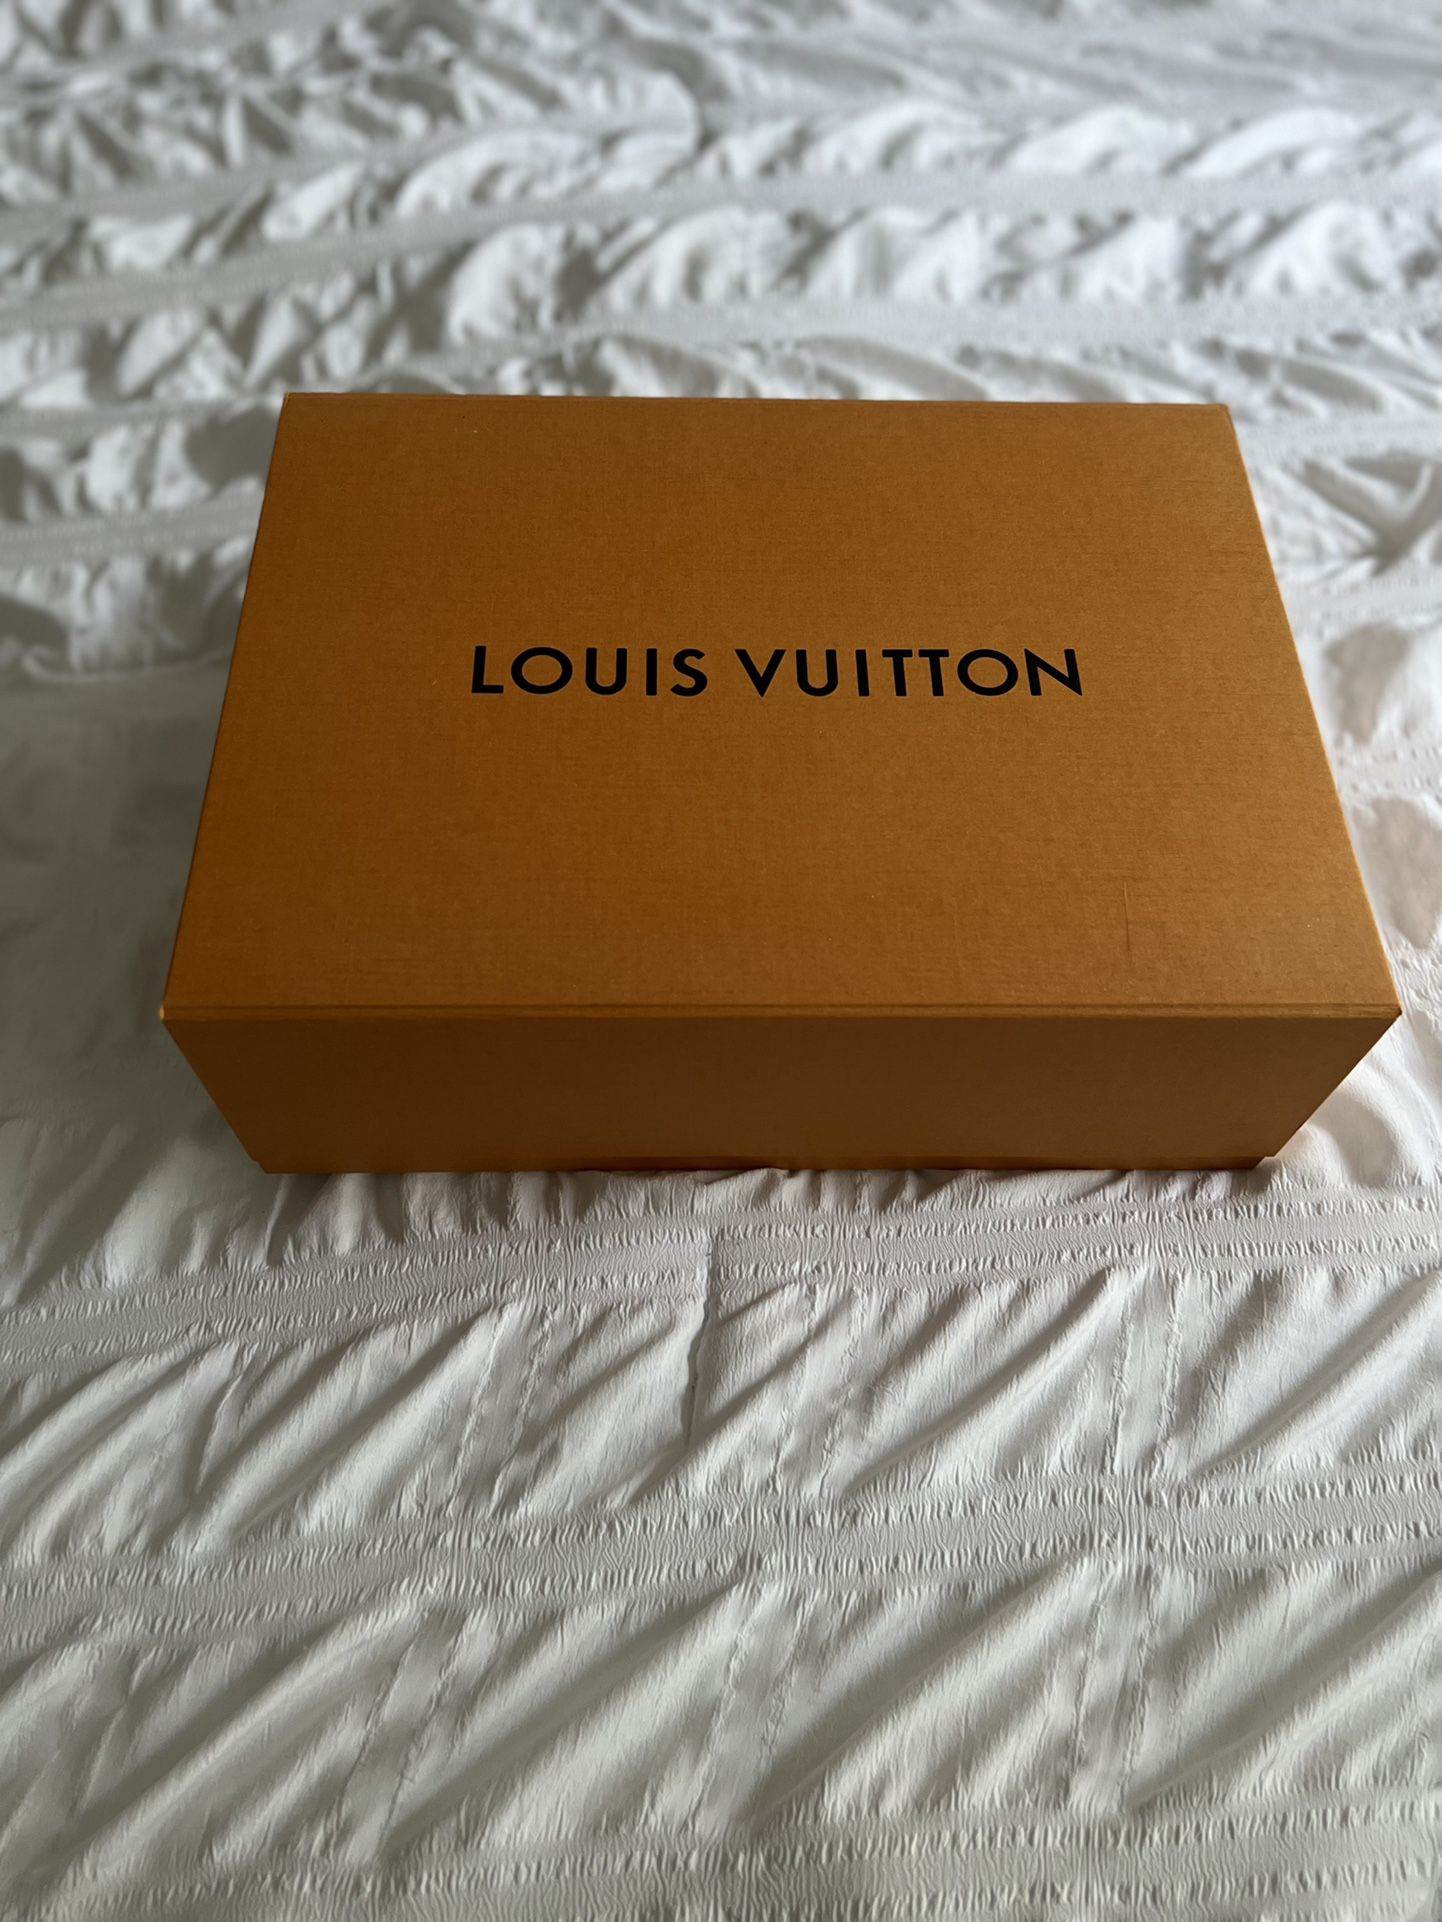 Louis Vuitton SS23 LVSK8 Sneaker Size 9/9.5 for Sale in Baltimore, MD -  OfferUp